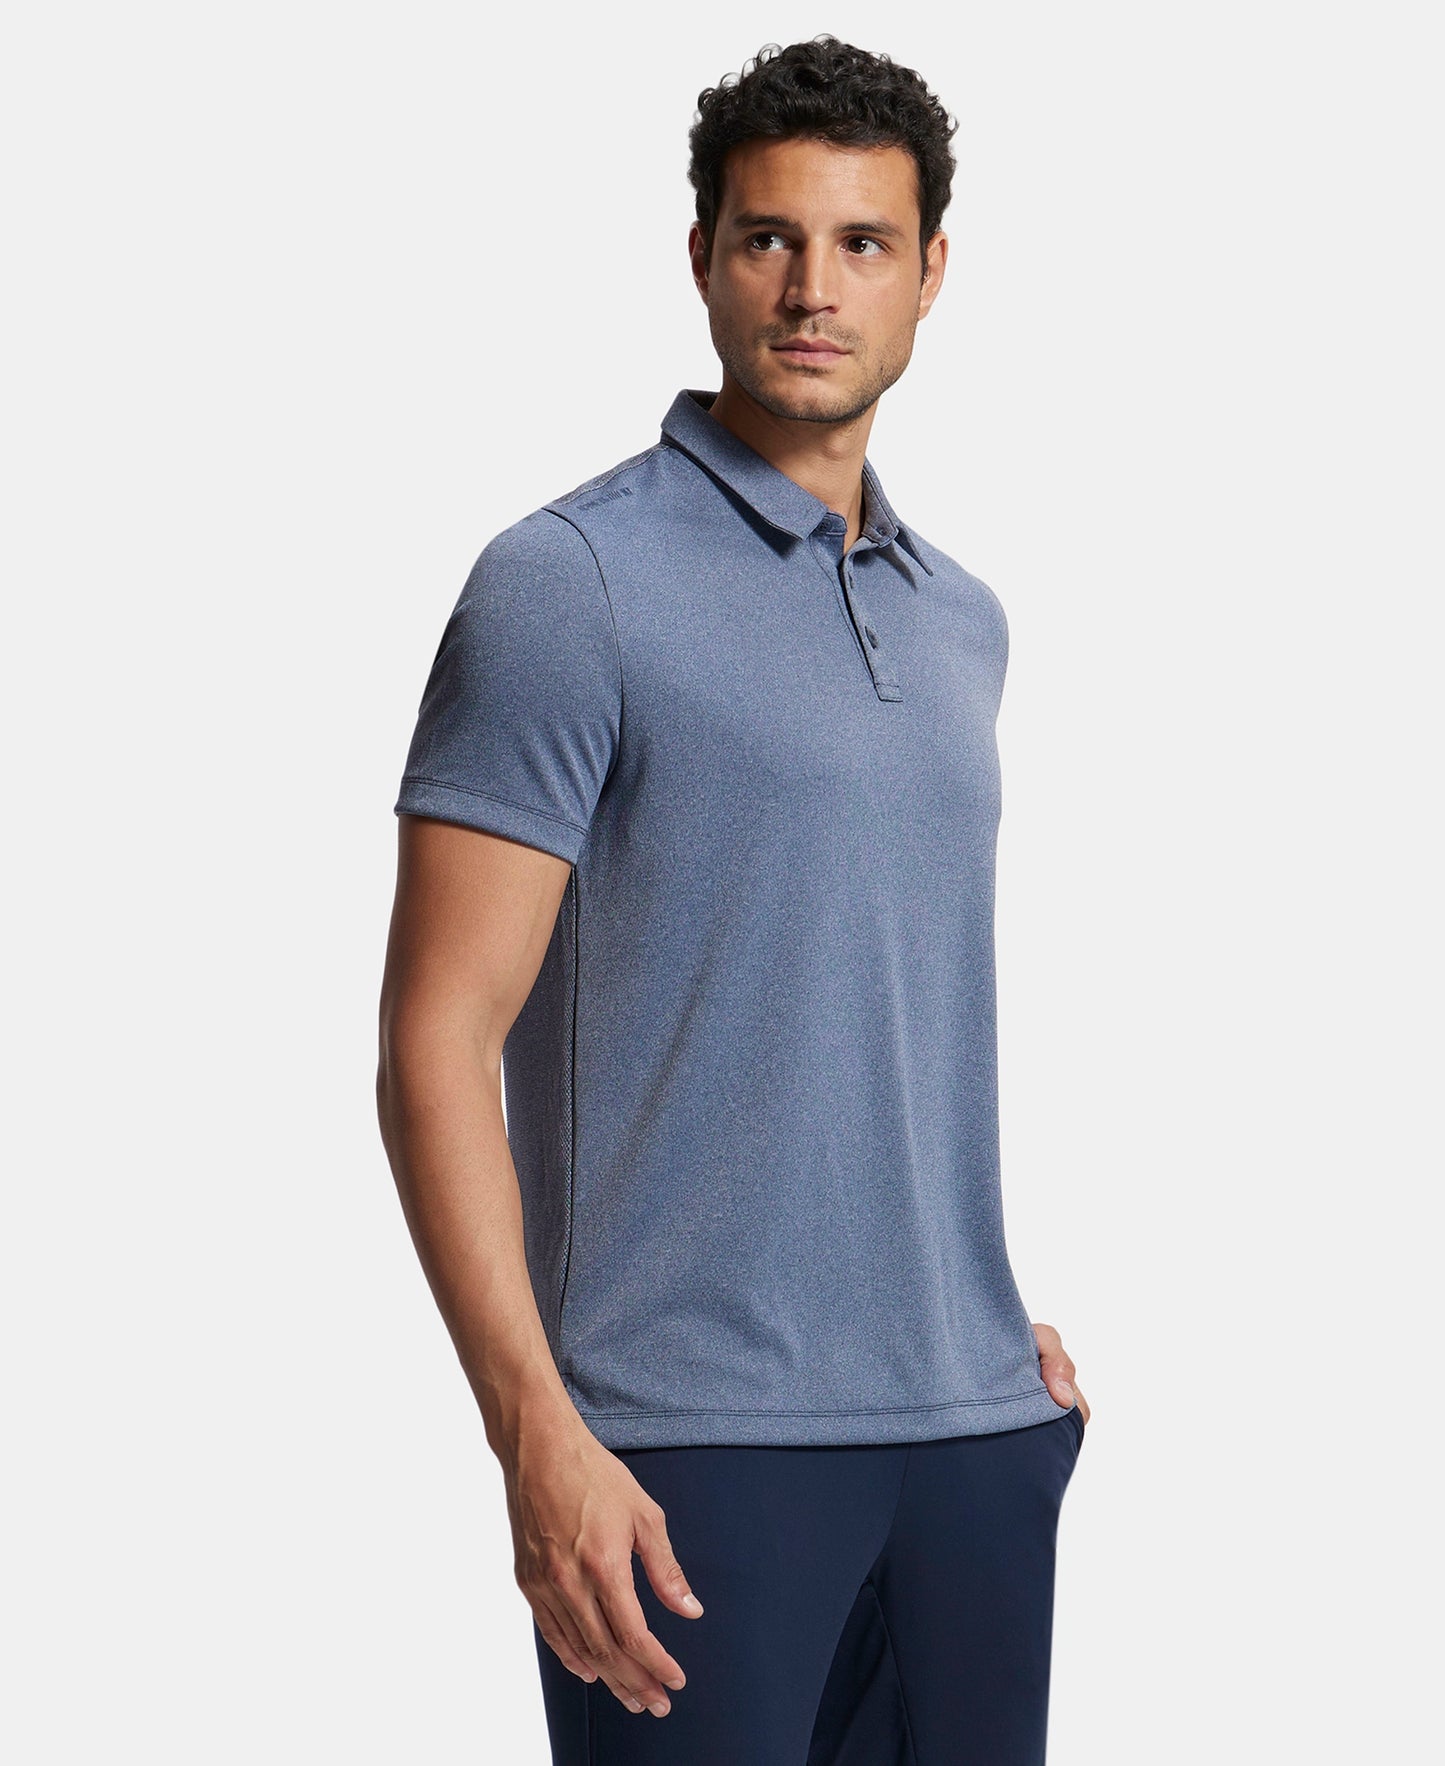 Recycled Microfiber Elastane Stretch Half Sleeve Polo T-Shirt with Breathable Mesh - Navy